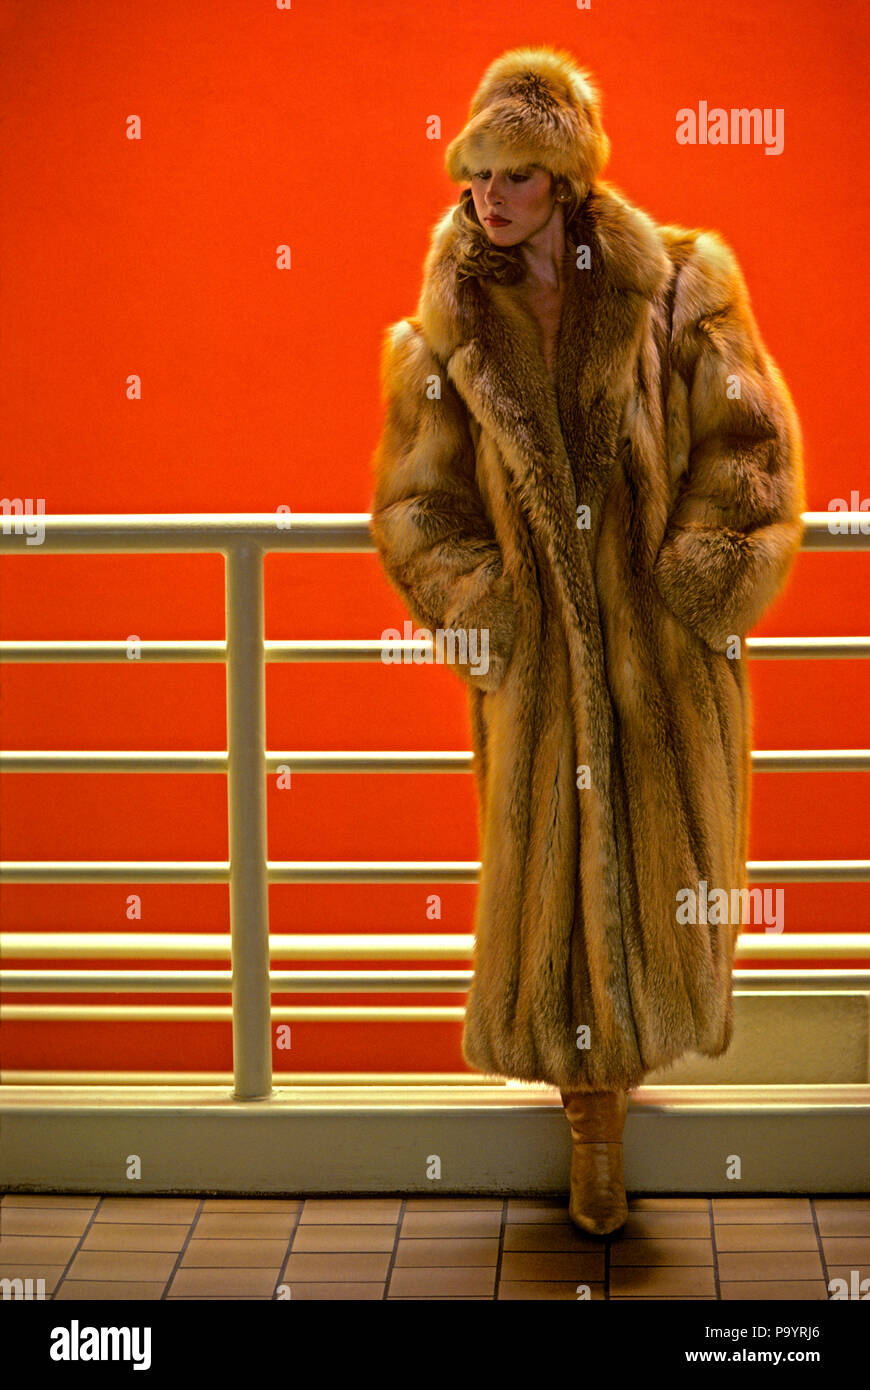 1980s WOMAN MODEL IN FUR COAT AND HAT STANDING BY WHITE RAILING  - 040038 TWE001 HARS FULL-LENGTH LADIES PERSONS GROWN-UP NORTH AMERICA NORTH AMERICAN PEOPLE STORY LEISURE STYLES RAILING OCCUPATIONS PELTS STYLISH FASHIONS FURS ROCKY MOUNTAINS YOUNG ADULT WOMAN CAUCASIAN ETHNICITY COLORADO GREAT PLAINS HEAD WARE OLD FASHIONED Stock Photo